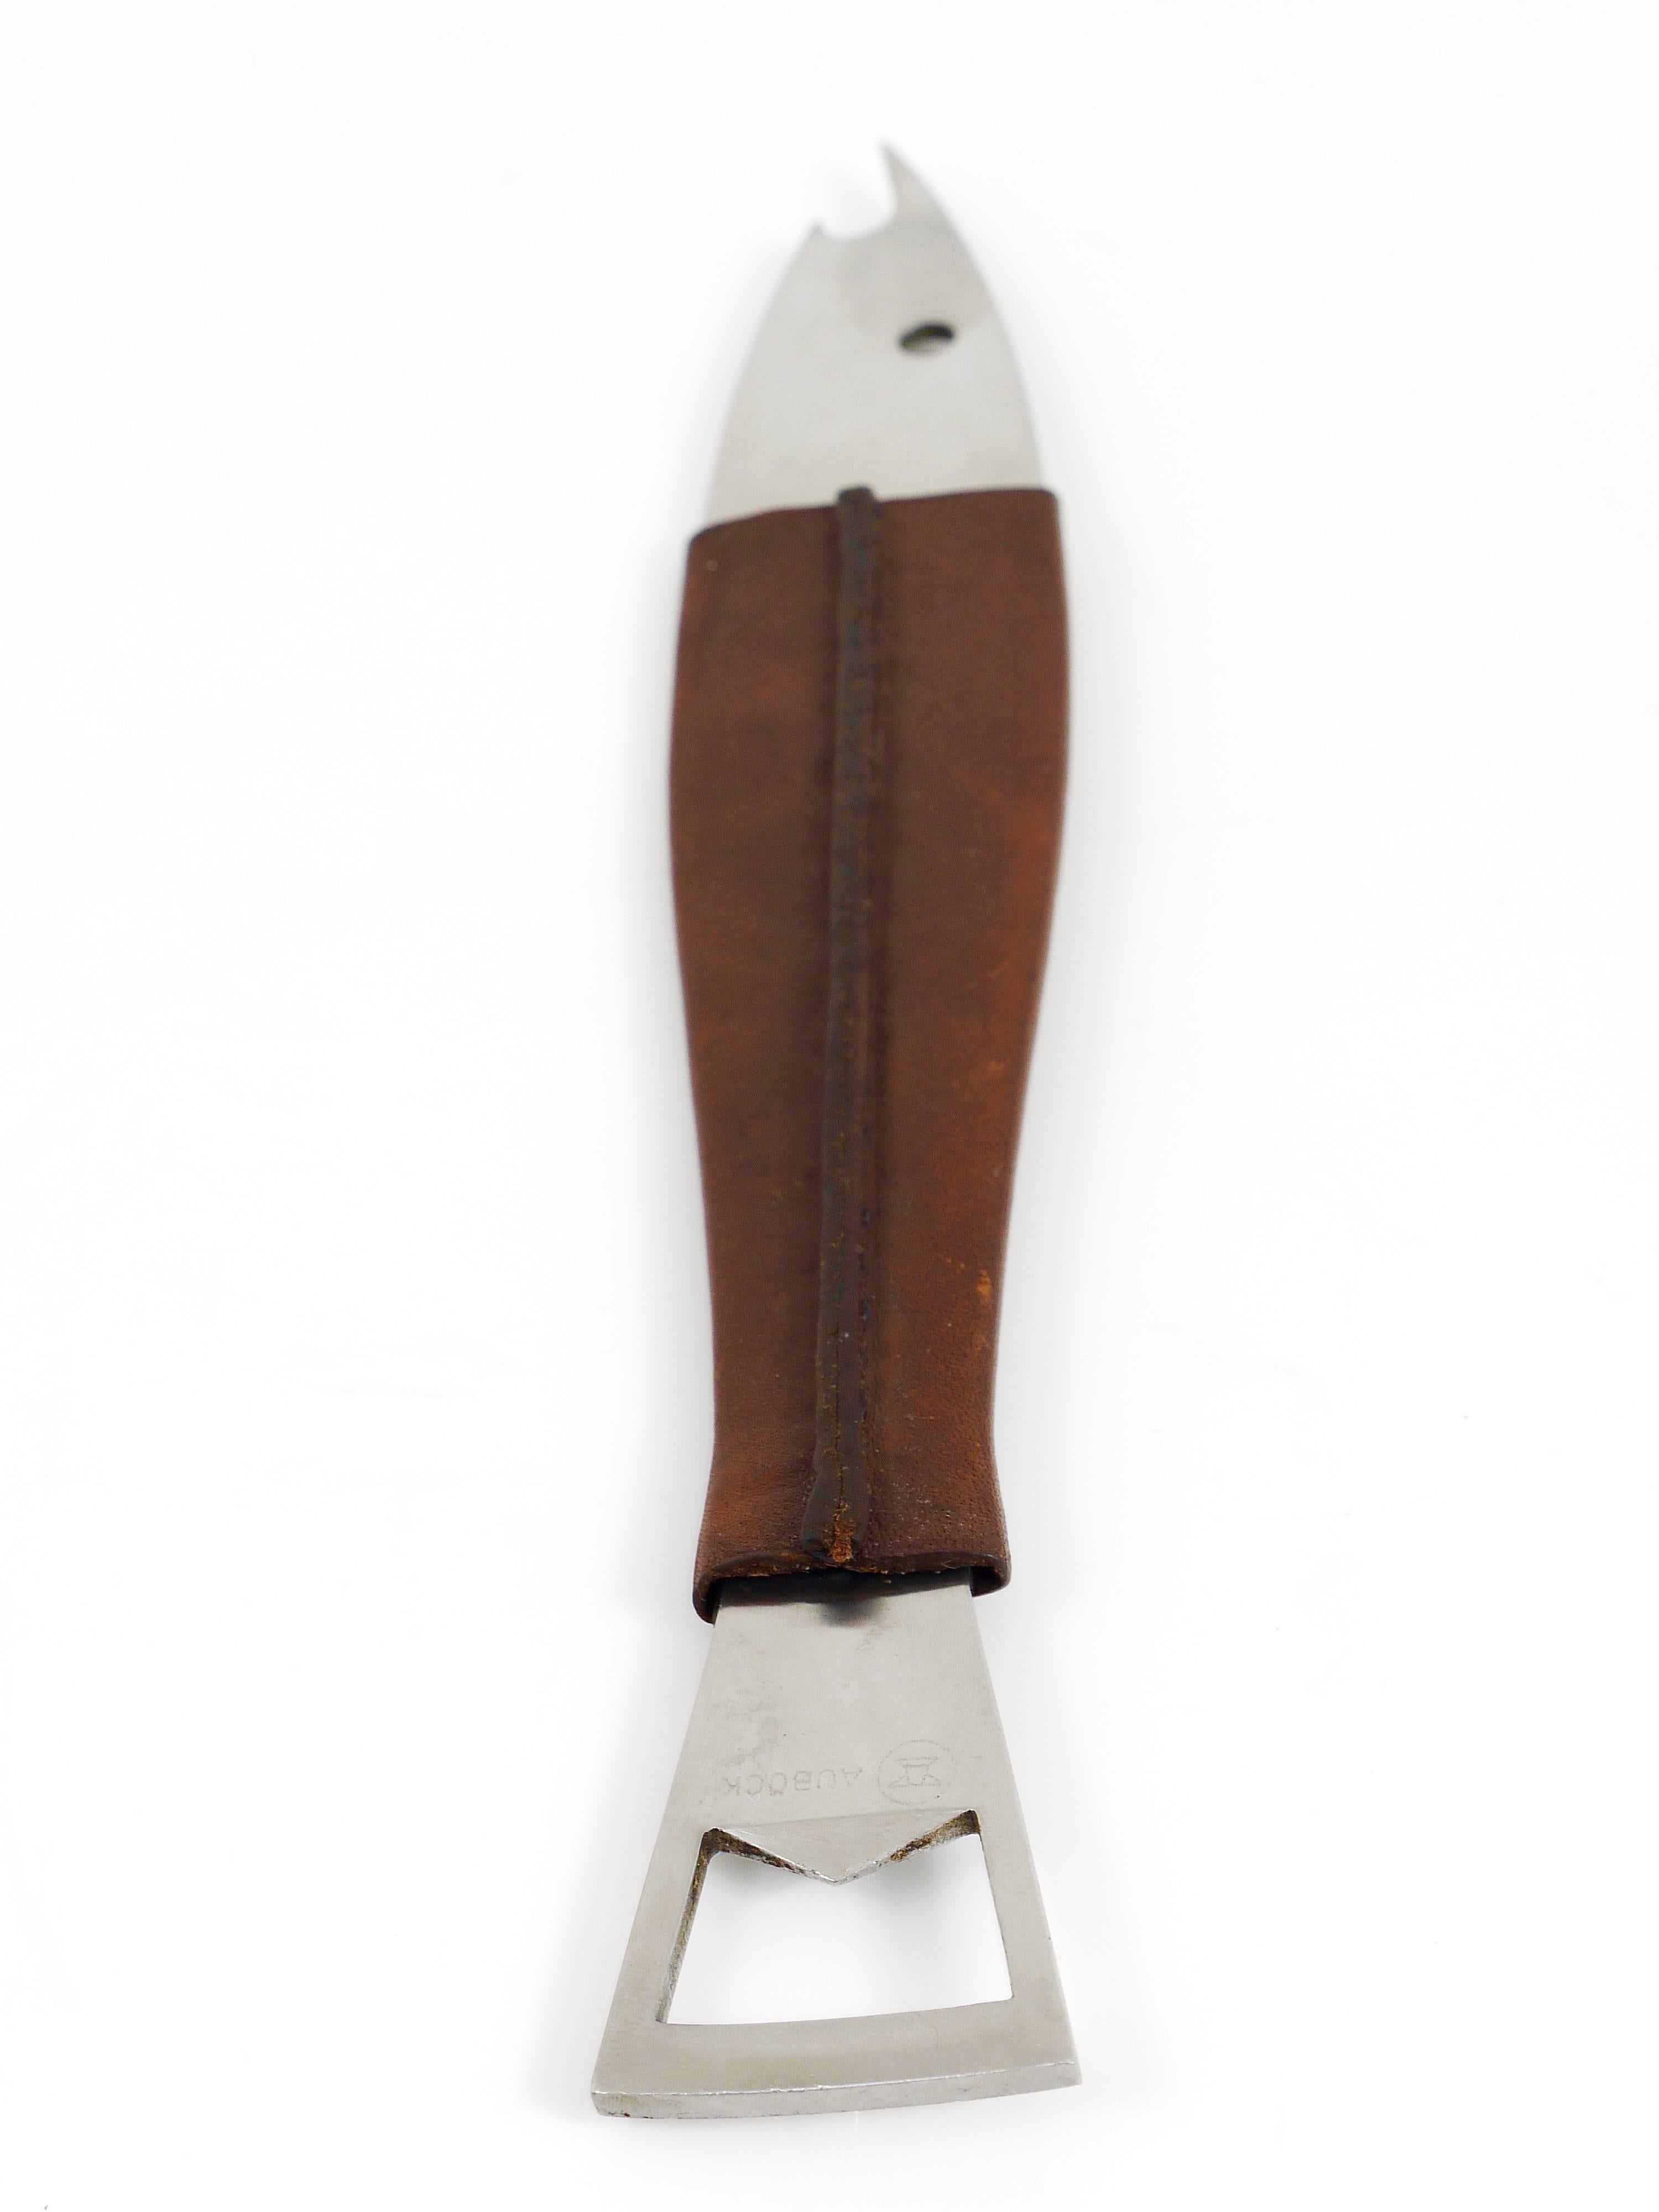 Carl Auböck Neptune Fish Bottle Opener, Leather & Steel by Amboss Austria, 1950s In Good Condition For Sale In Vienna, AT